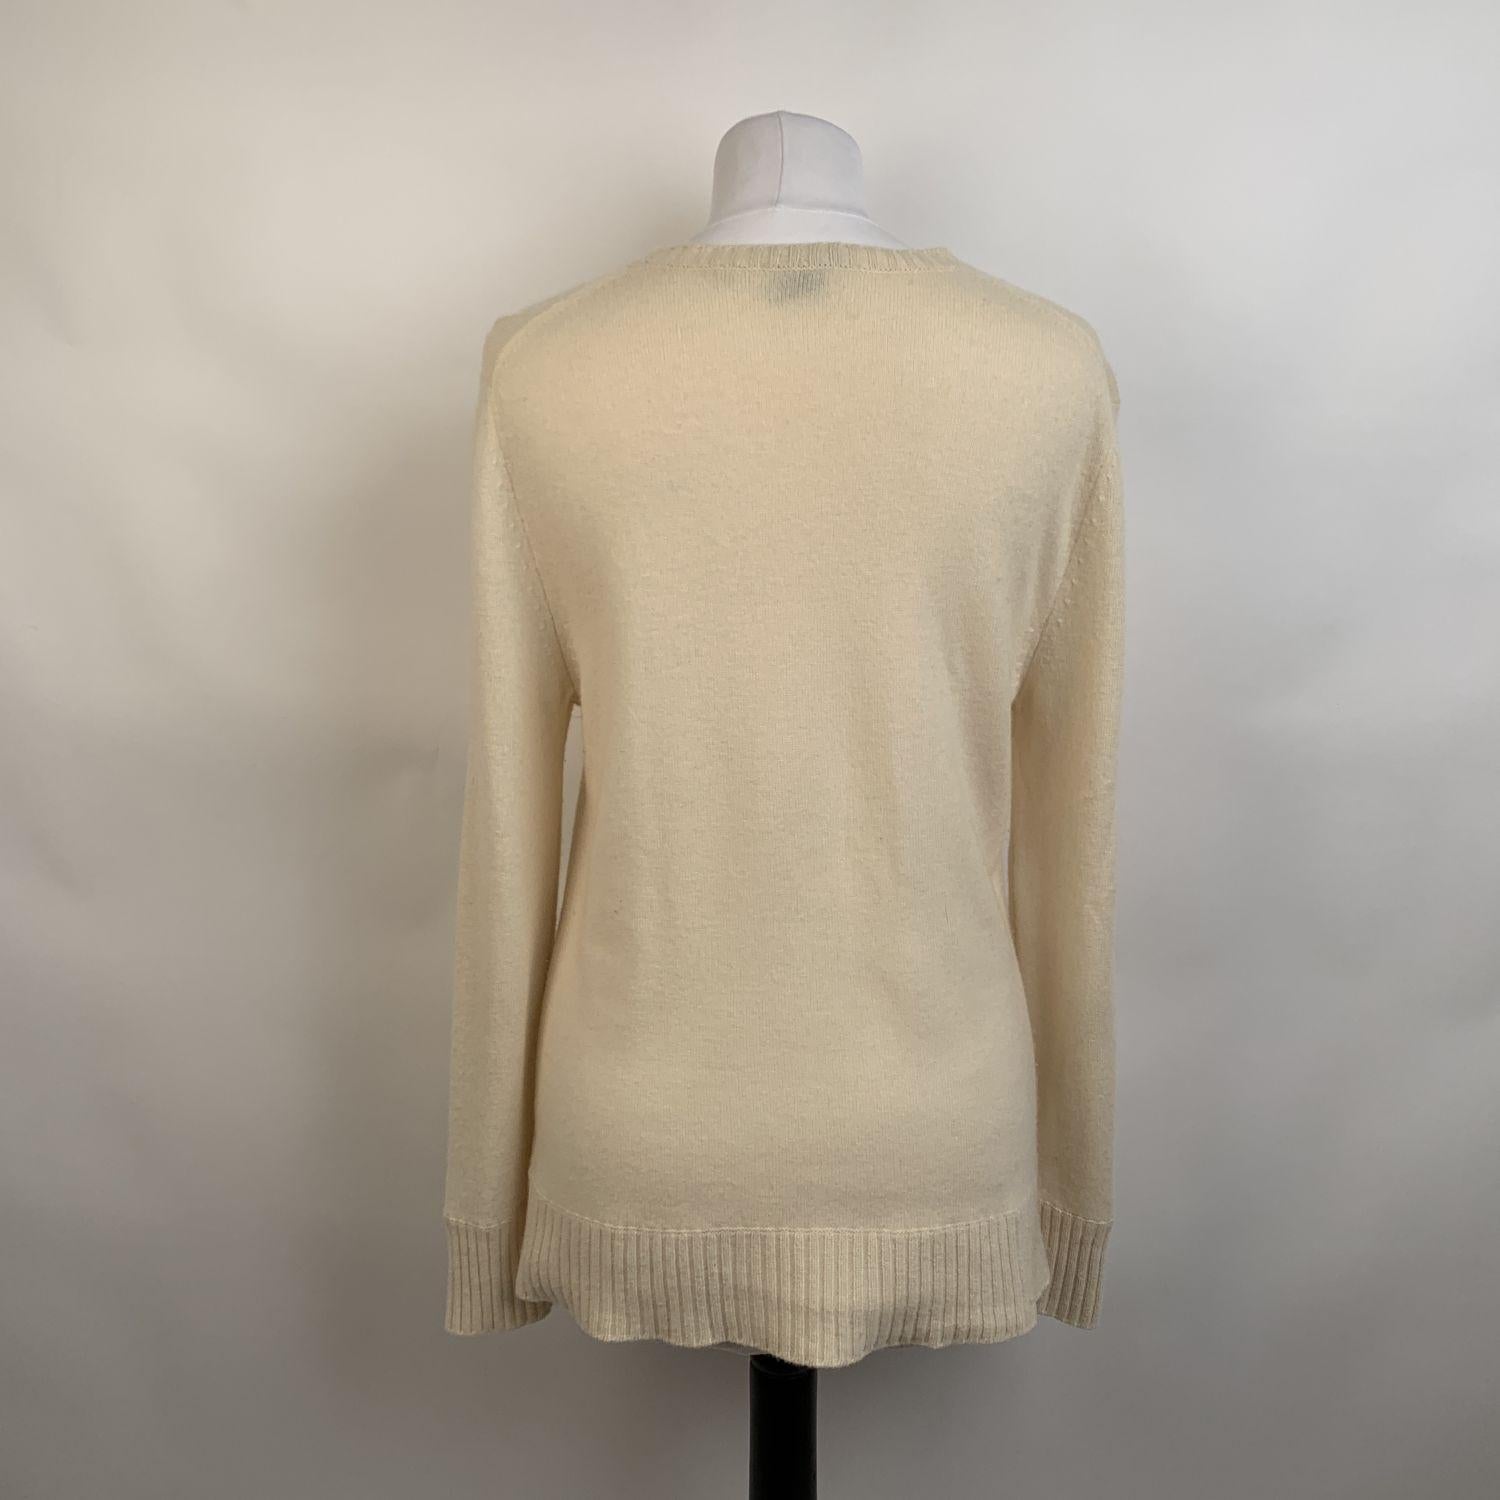 Women's Laura Biagiotti Ivory Wool Cashmere Long Sleeve Jumper Sweater Size 40